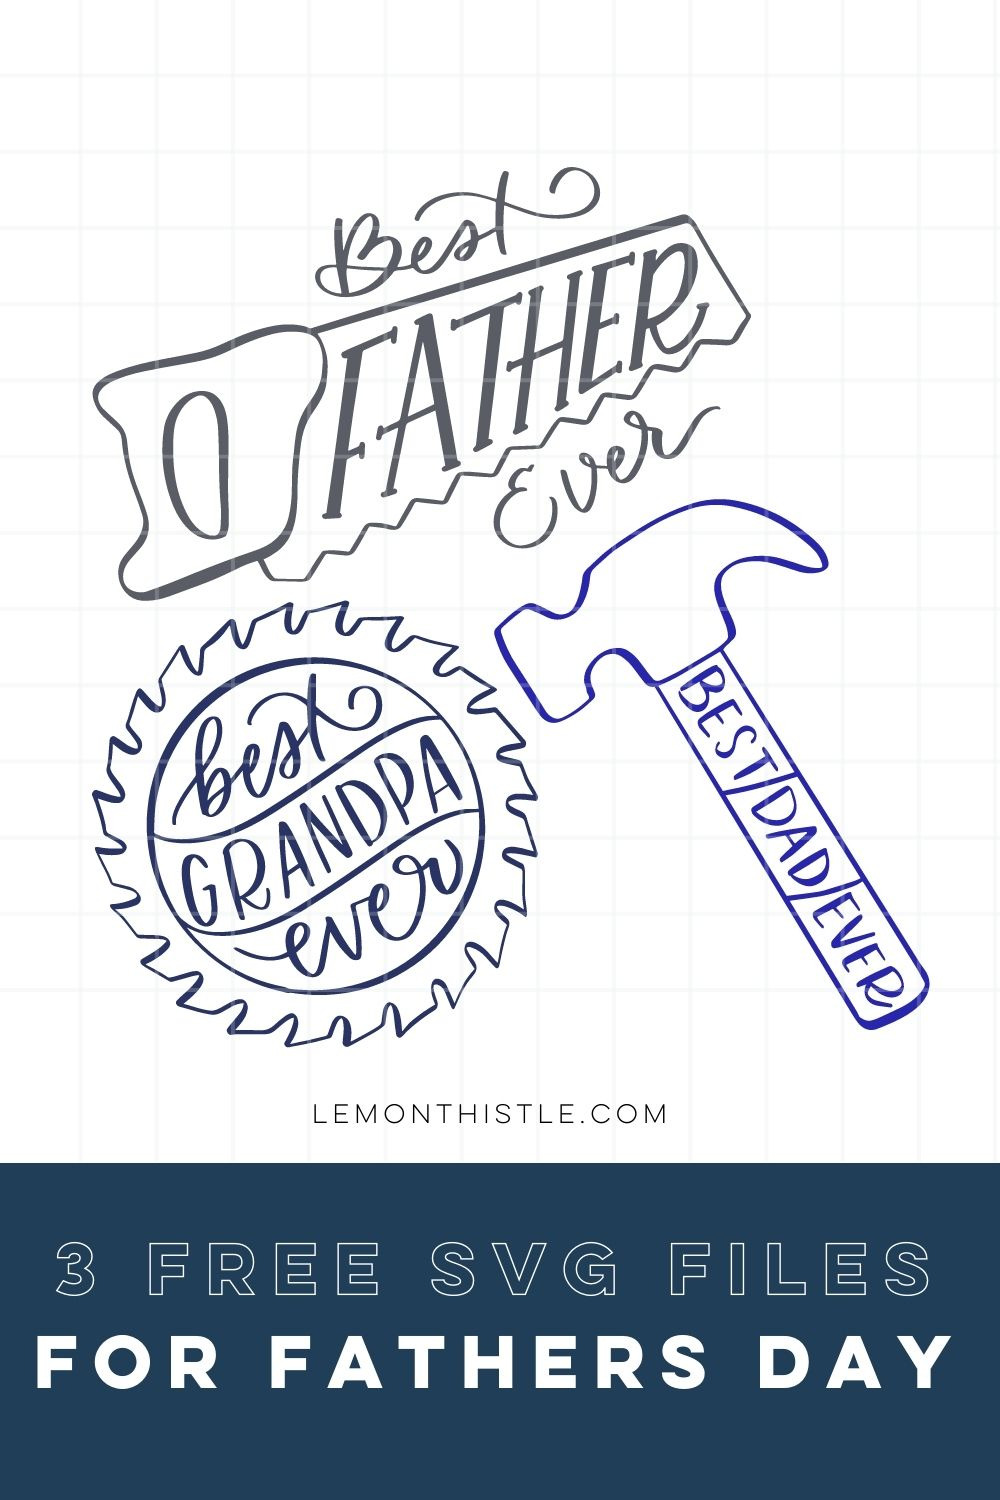 Father's Day Gifts made with paint | Homemade fathers day gifts, Father's  day diy, Fathers day